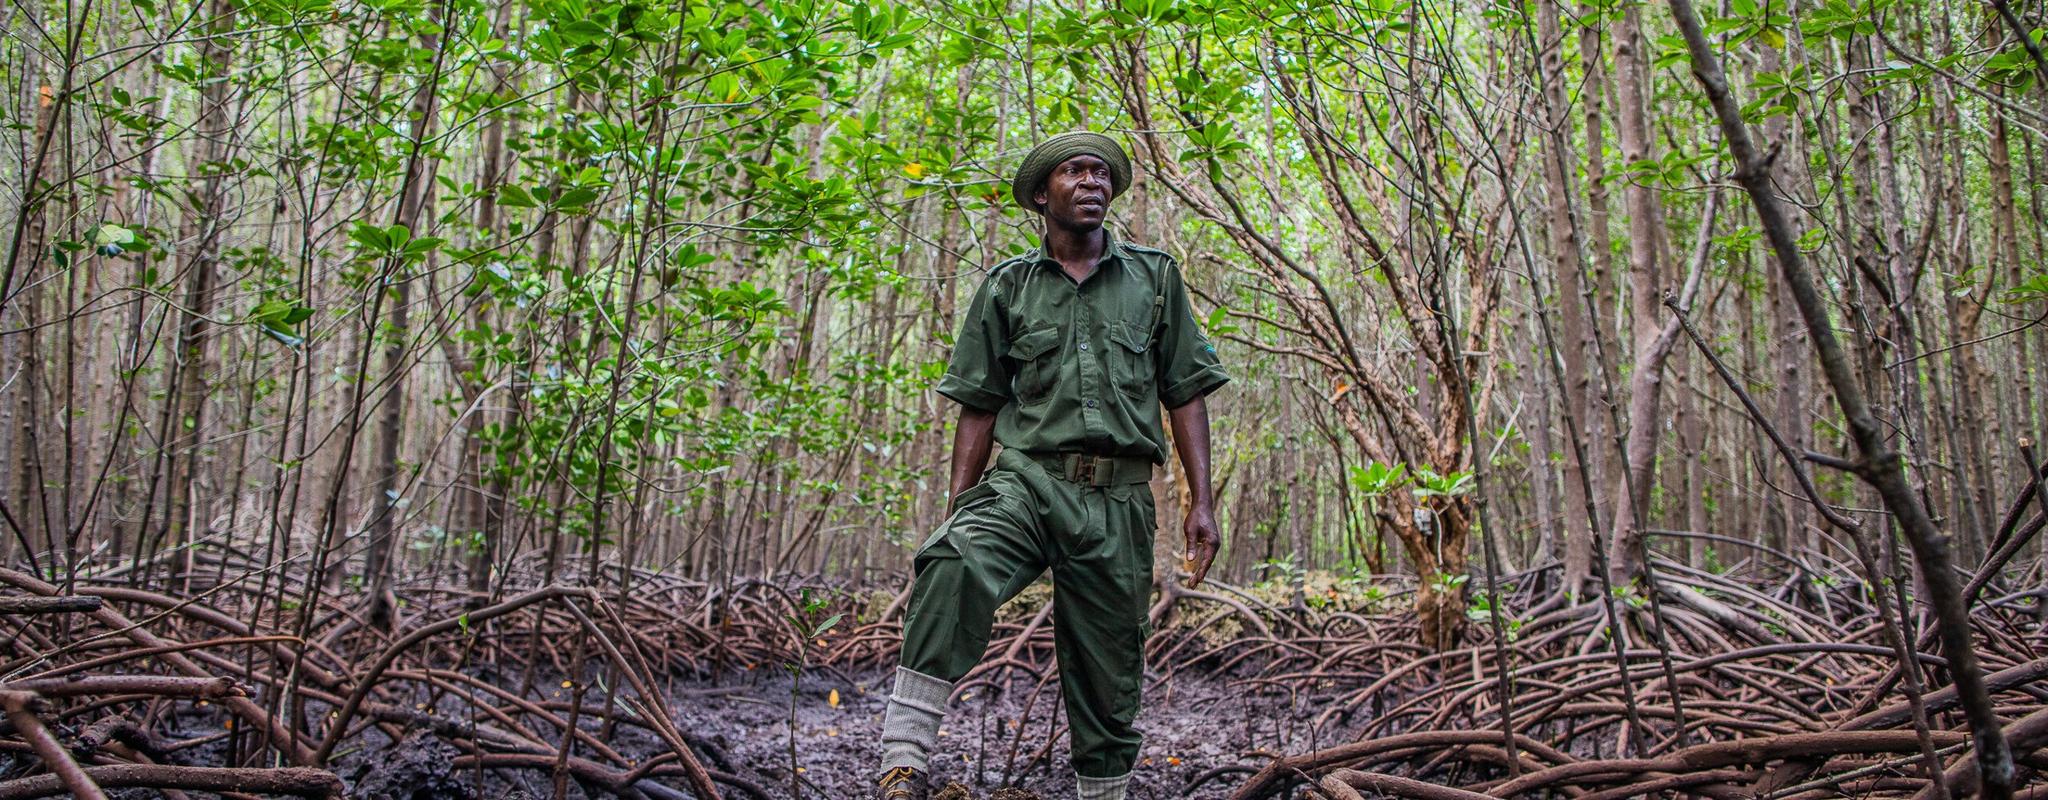 A man stands in the mud surrounded by mangroves.